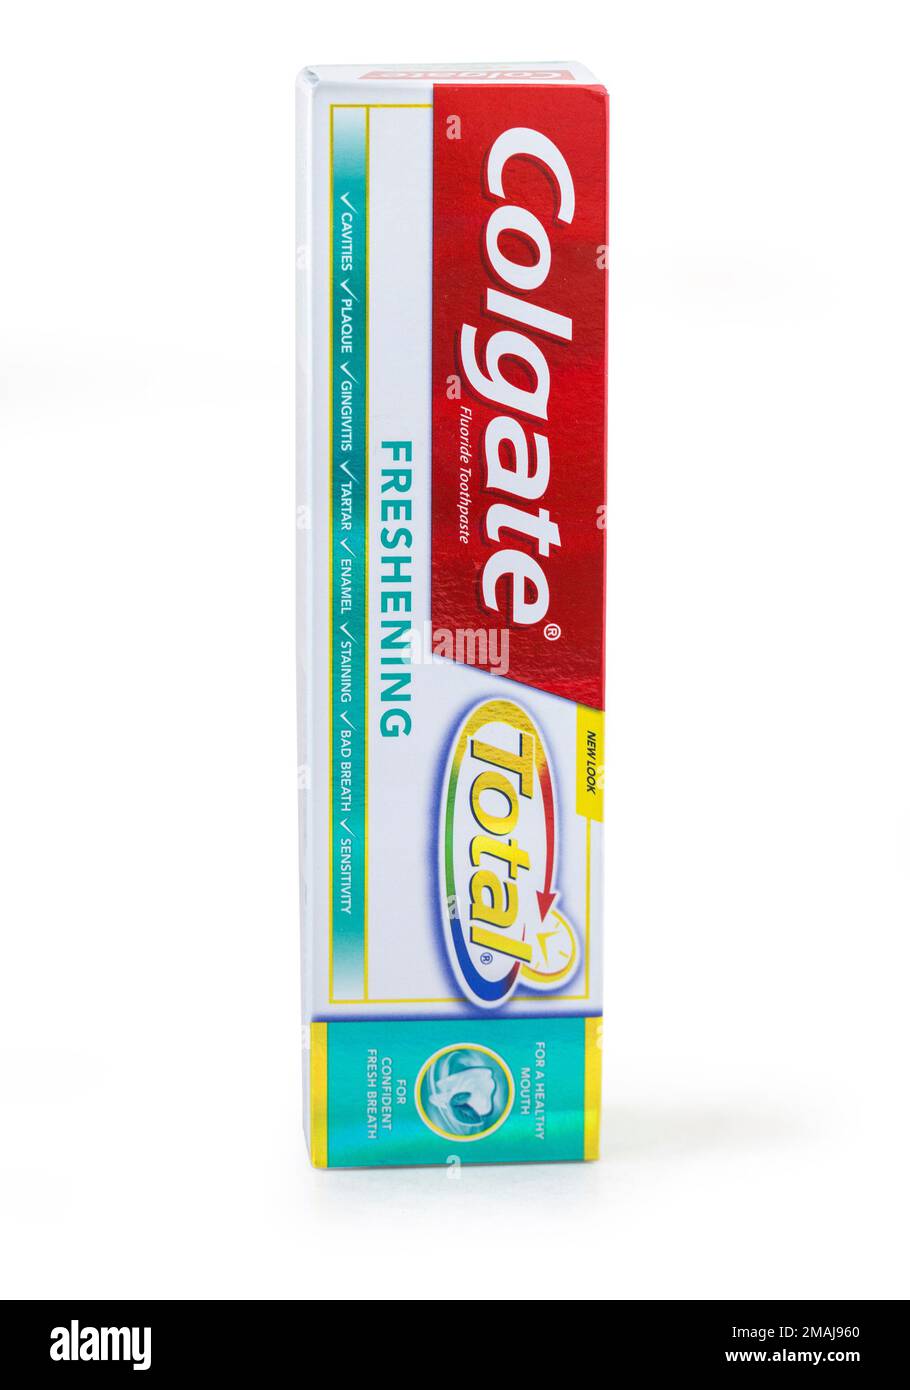 Warsaw, Poland - November 04, 2016 Package of Colgate toothpaste cavity protection. Stock Photo